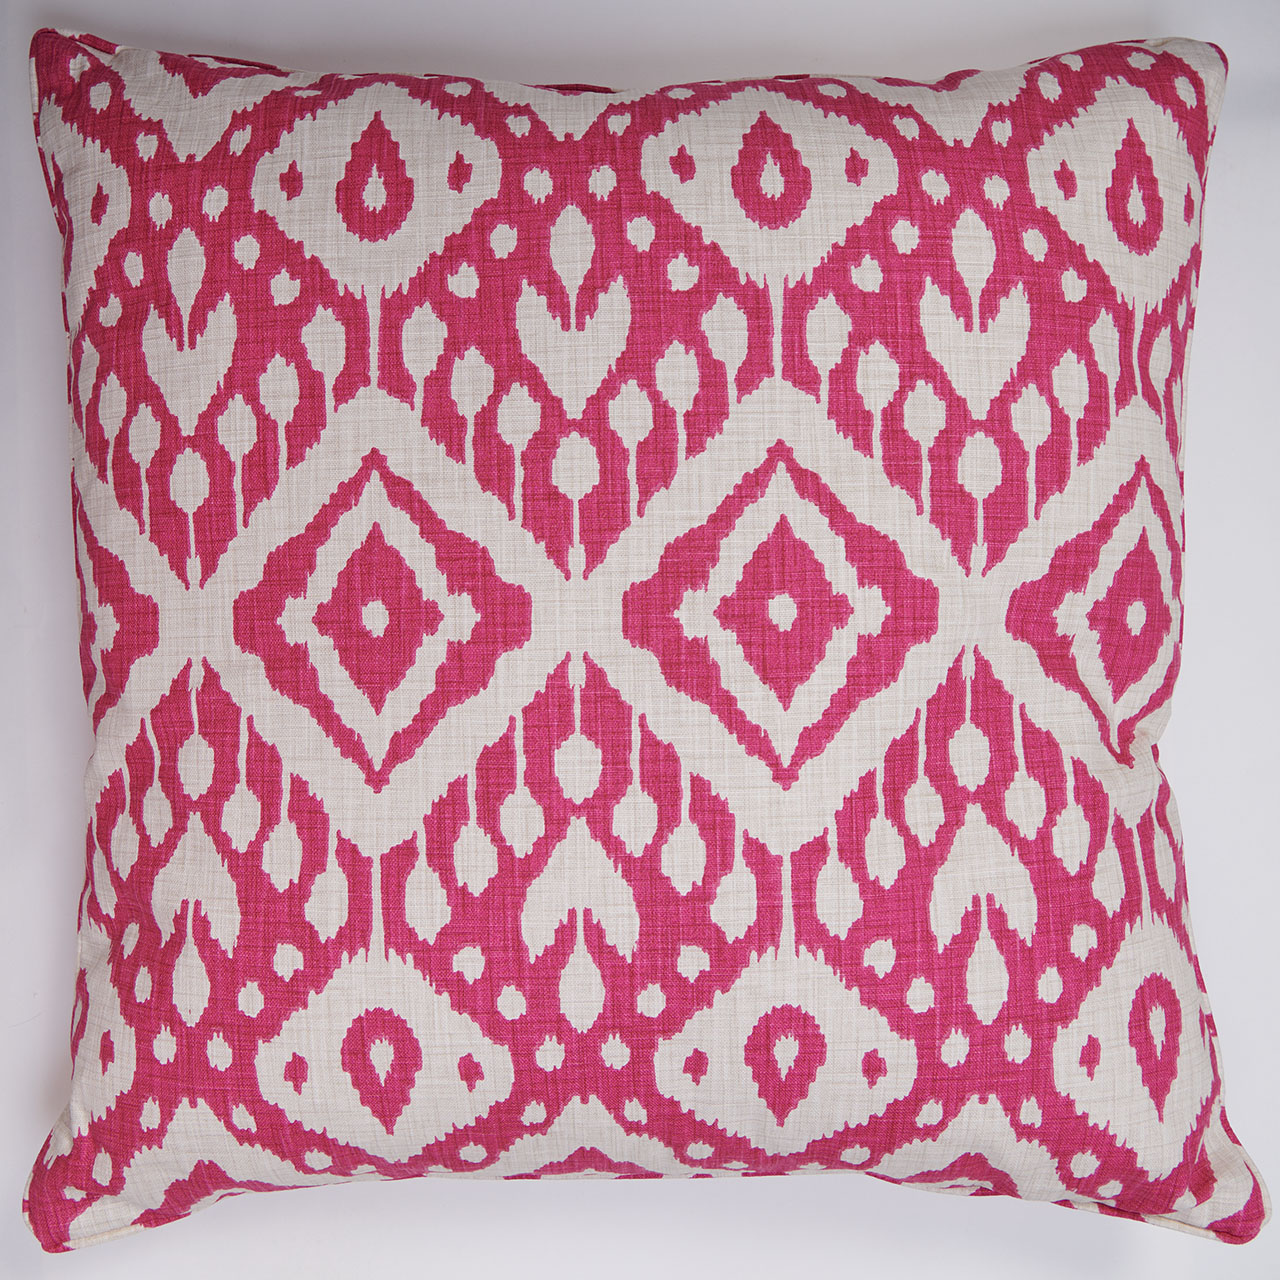 Ikat Inspired Scatter Cushion